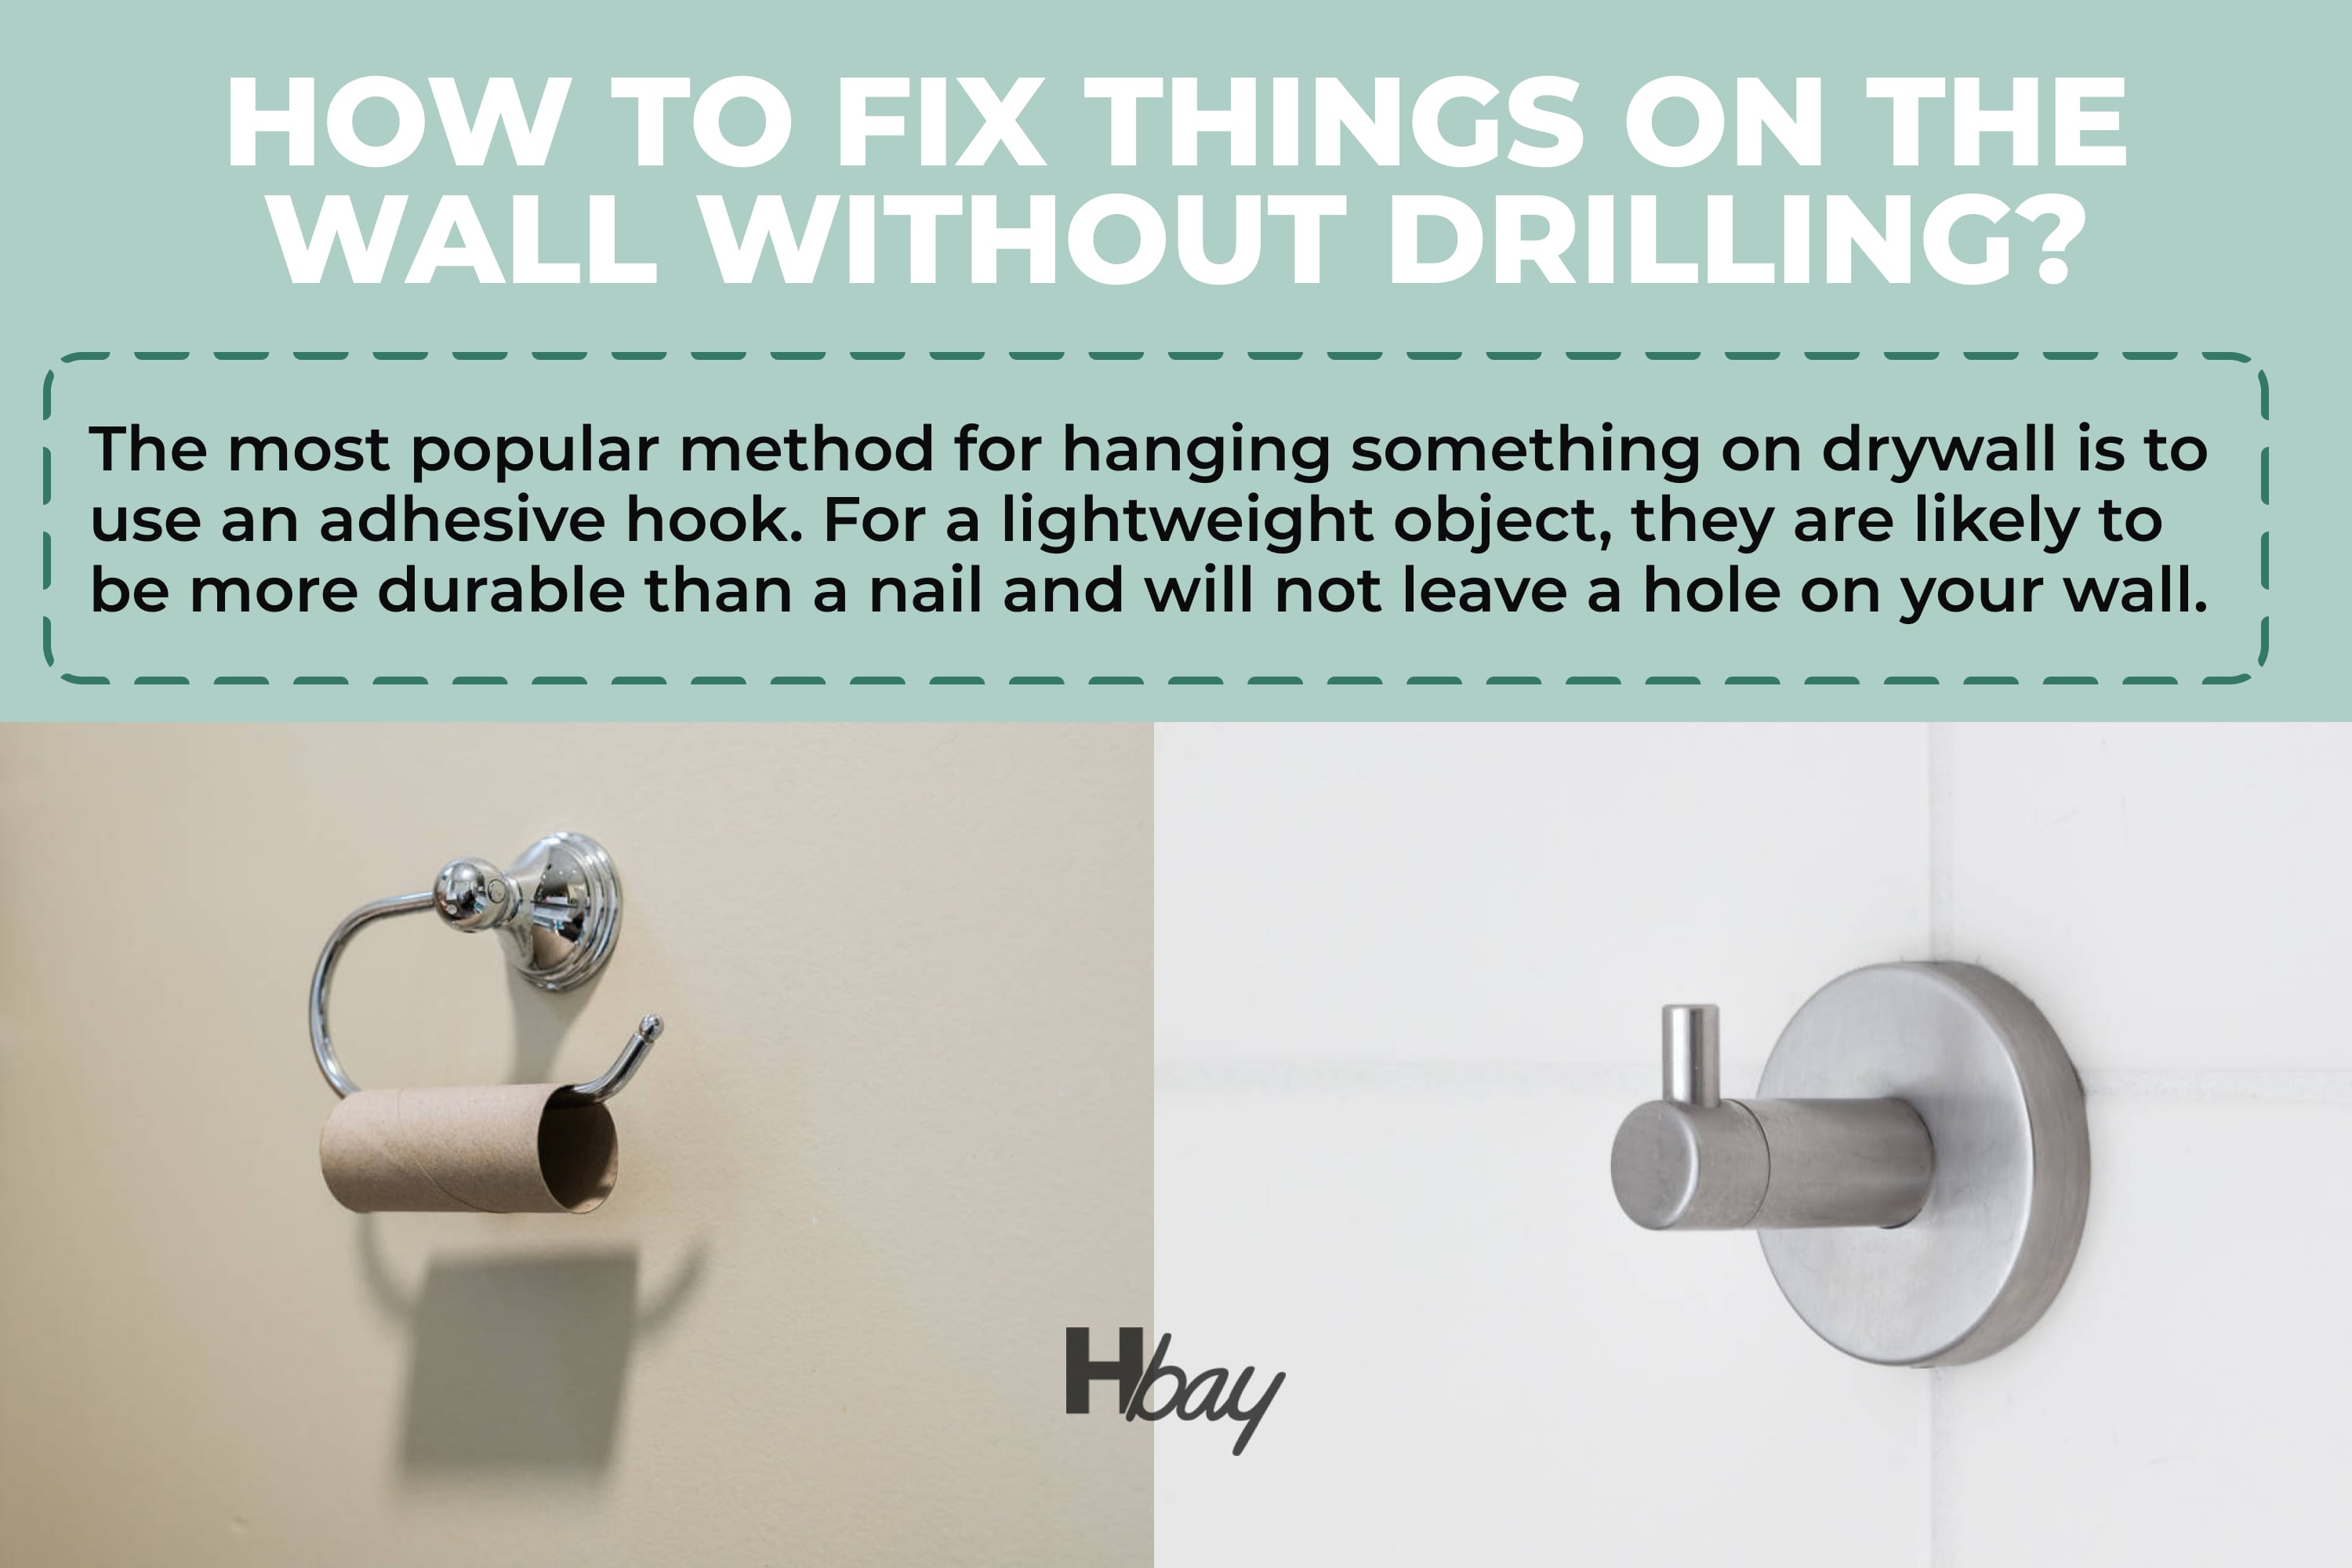 How to Drill Into a Stud – Simple Guide in 4 Steps - Housekeeping Bay